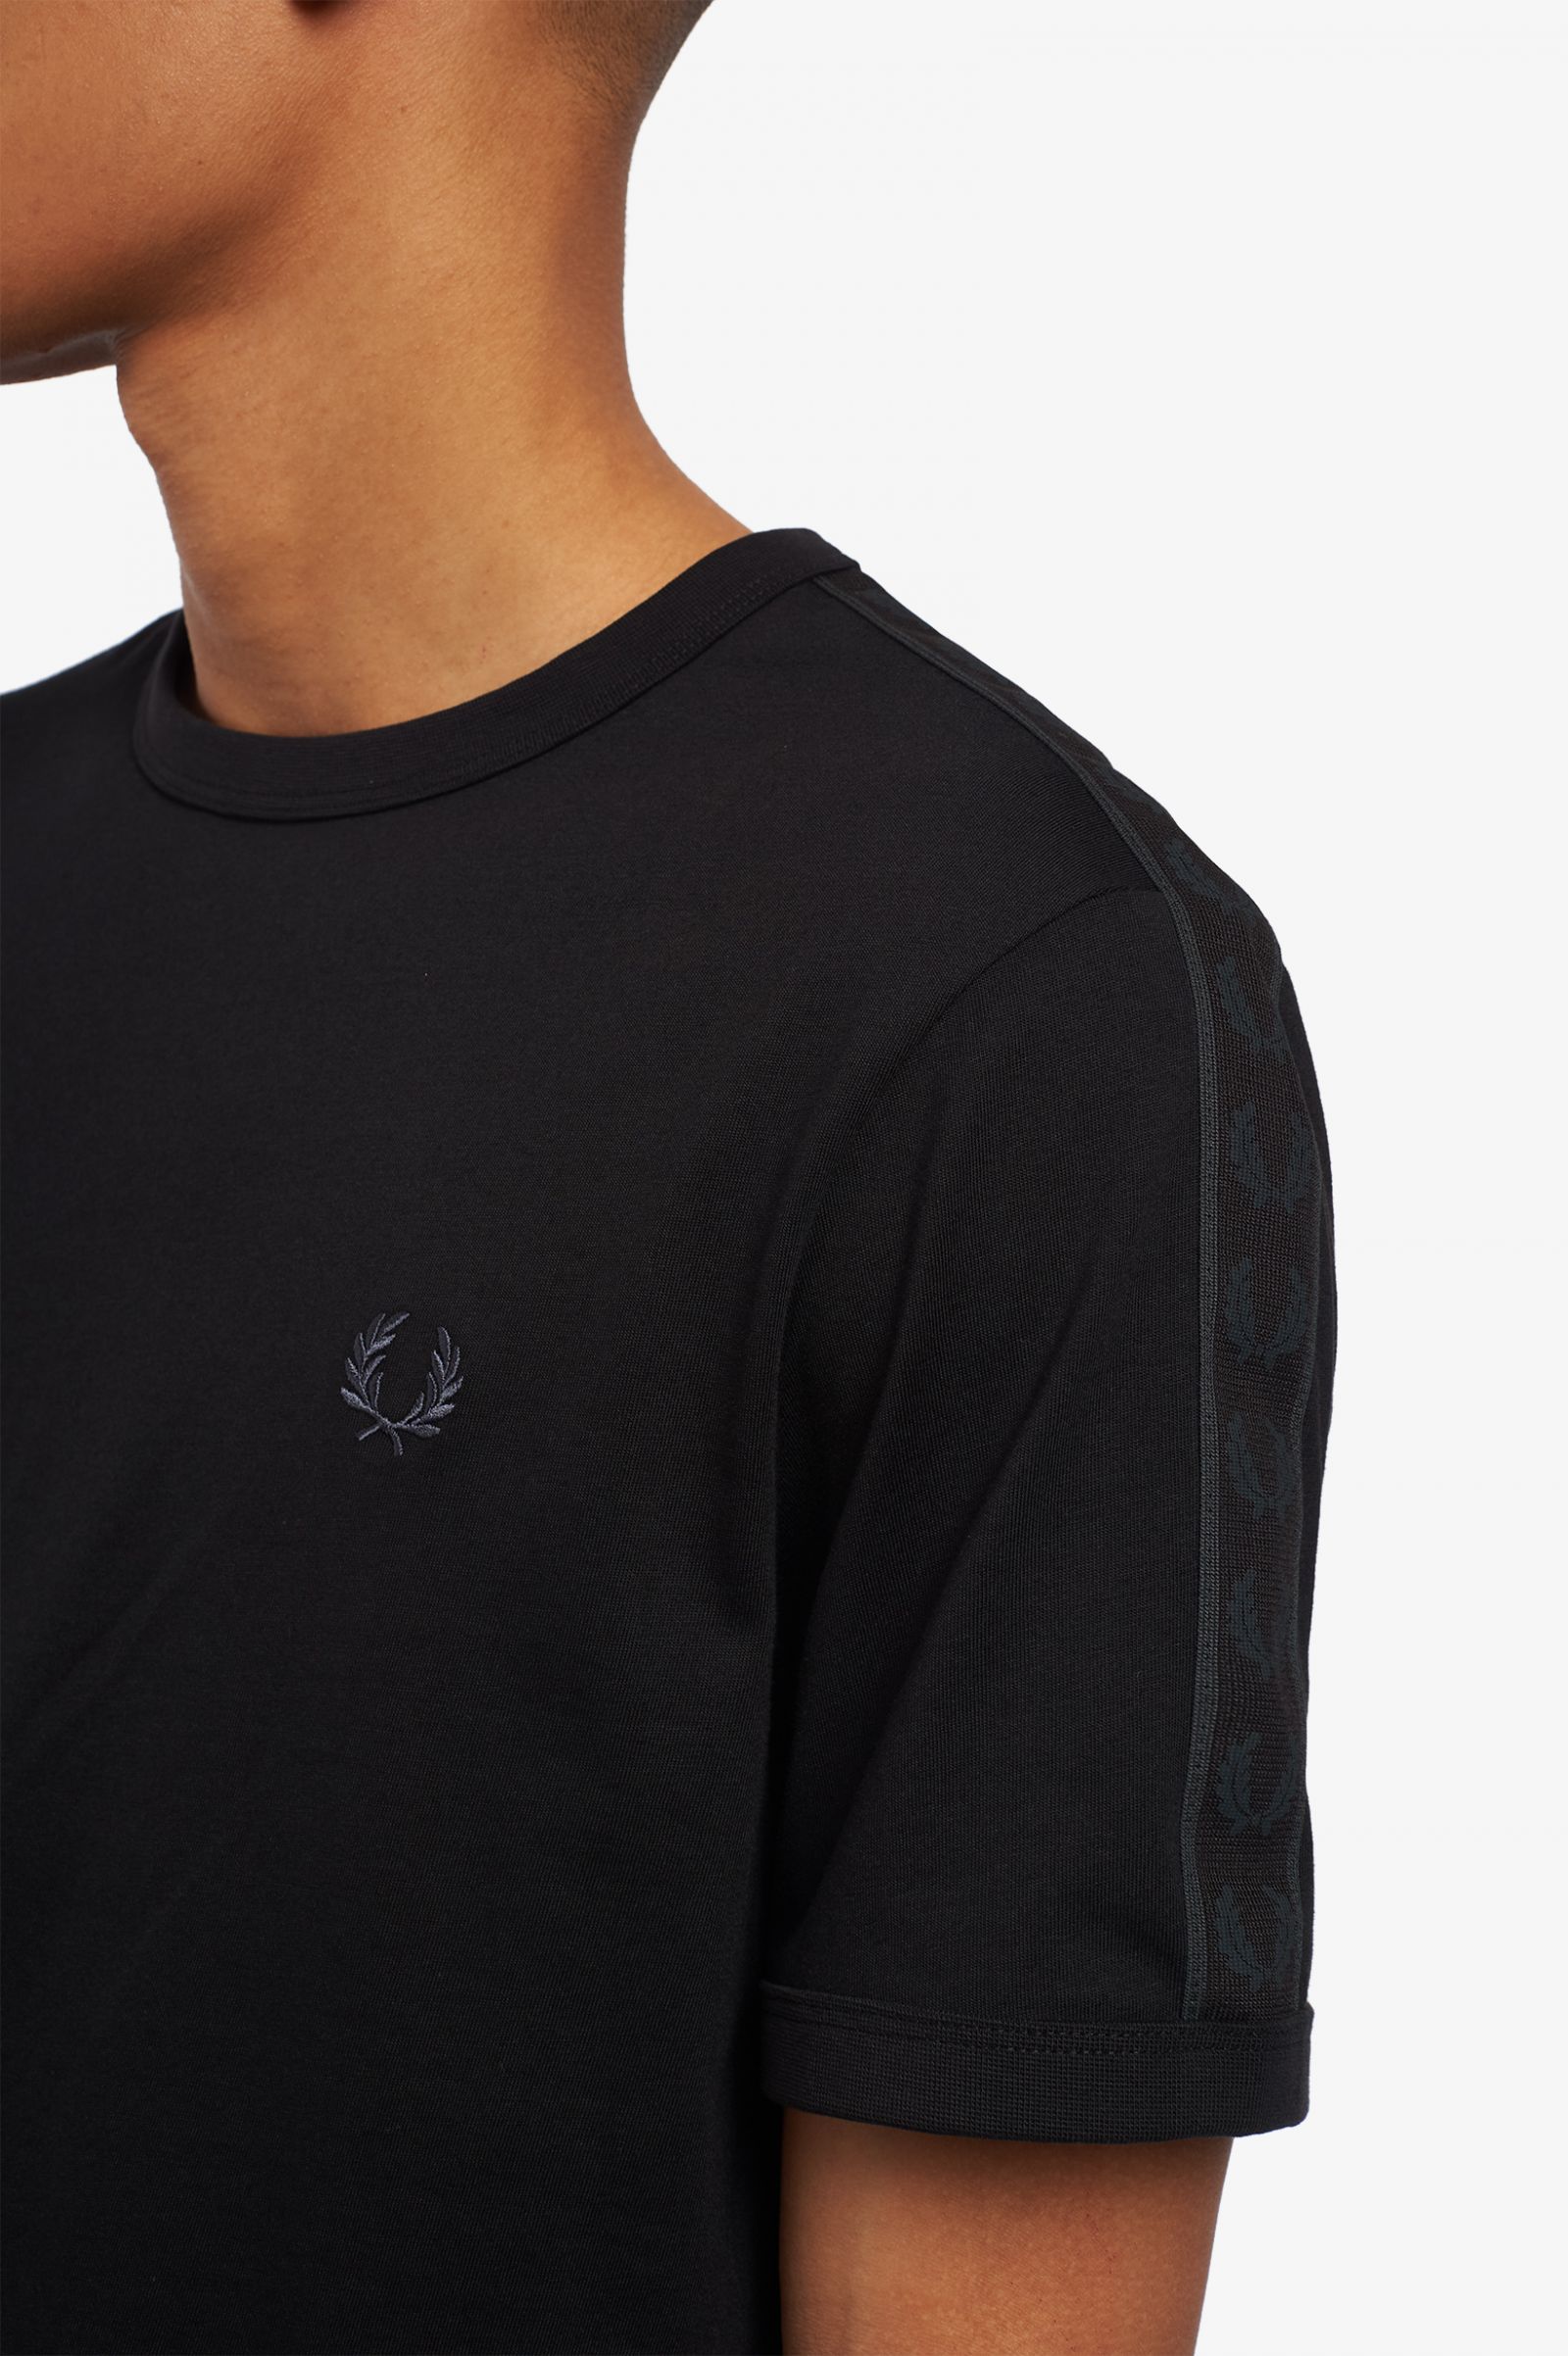 fred perry black t shirt